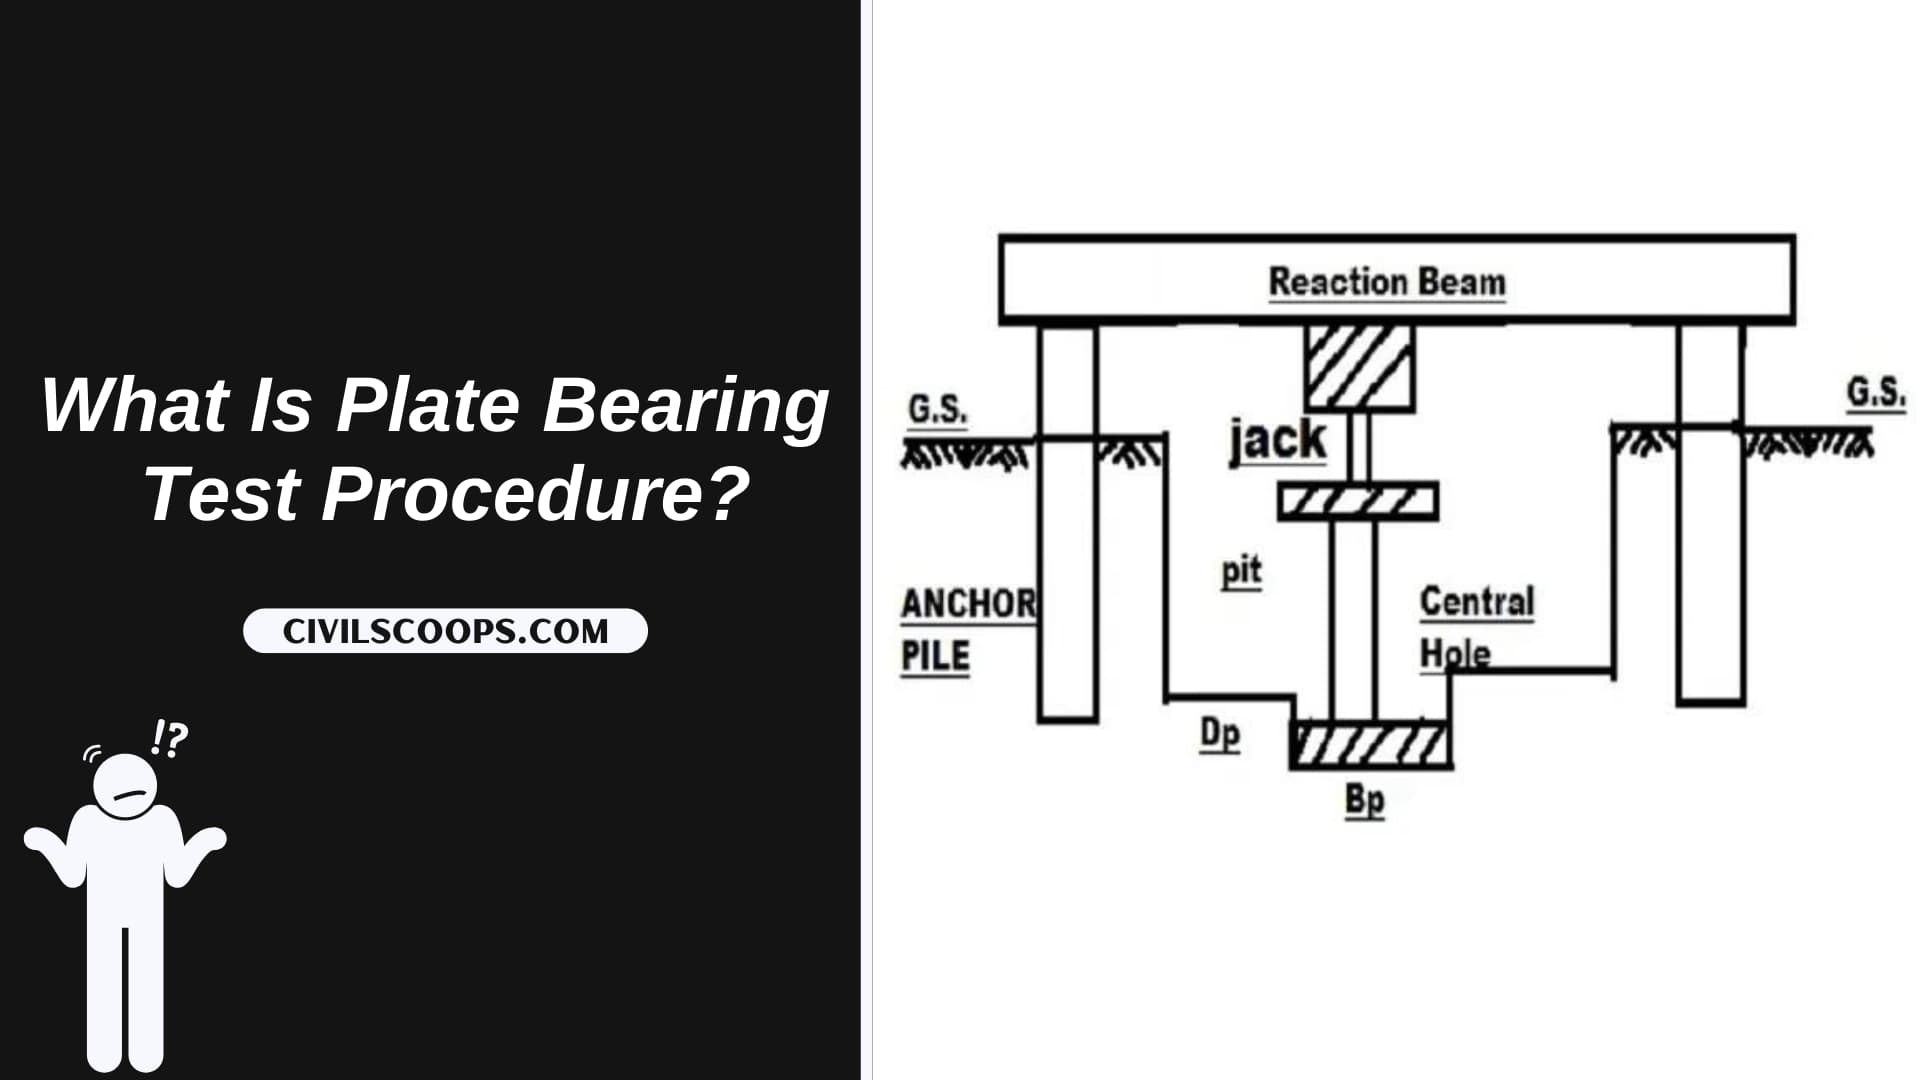 What Is Plate Bearing Test Procedure